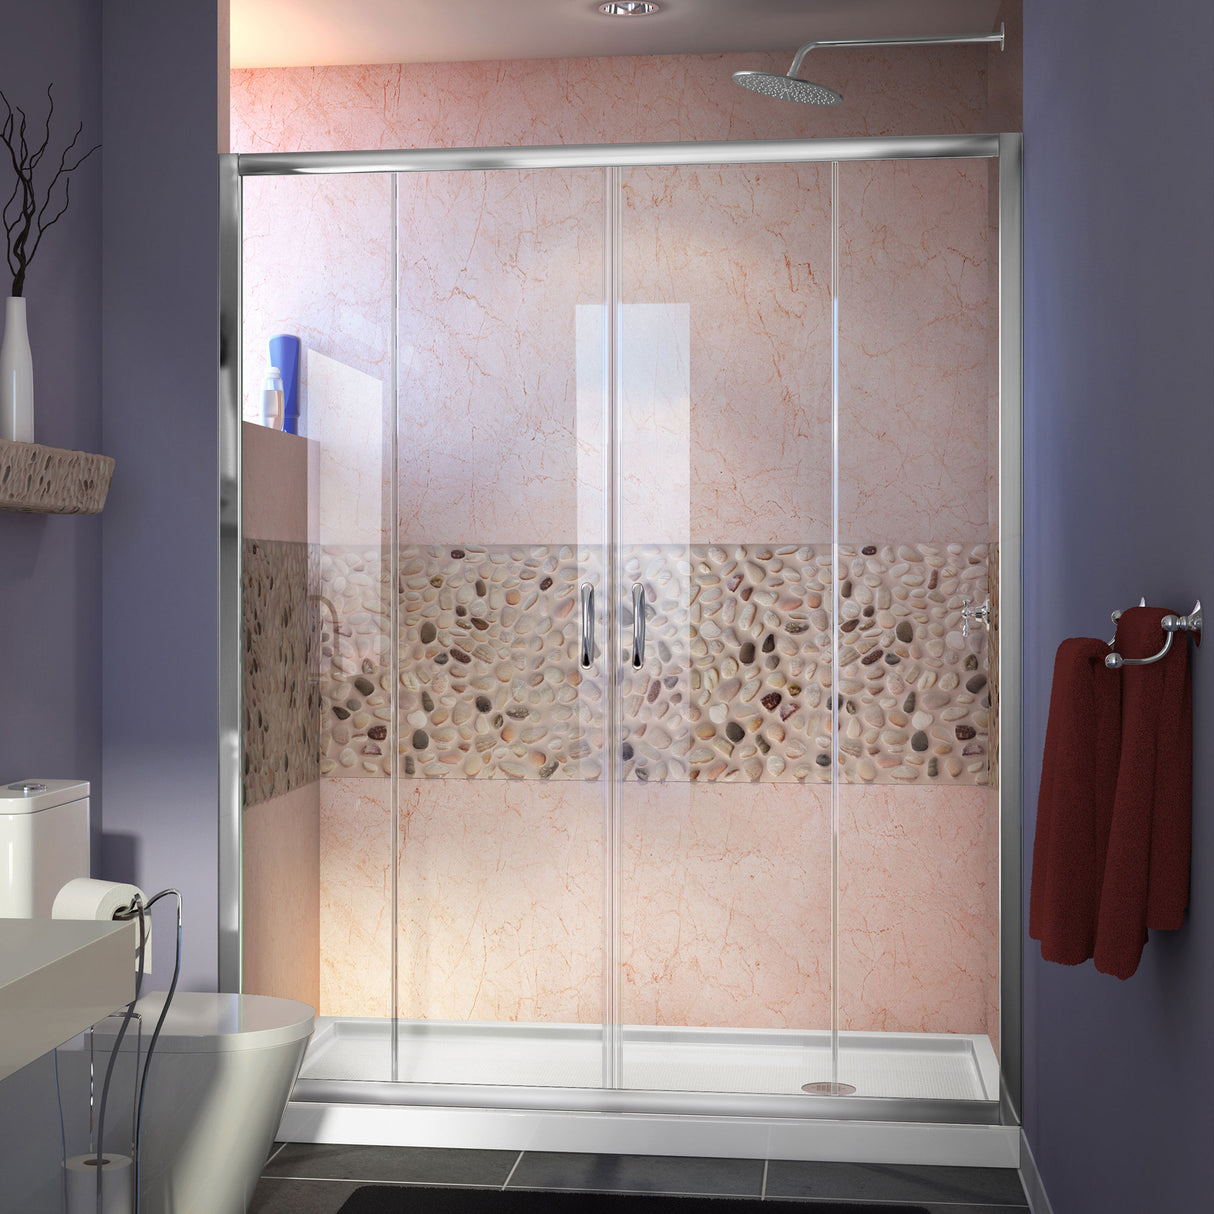 DreamLine Visions 30 in. D x 60 in. W x 74 3/4 in. H Sliding Shower Door in Chrome with Right Drain White Shower Base